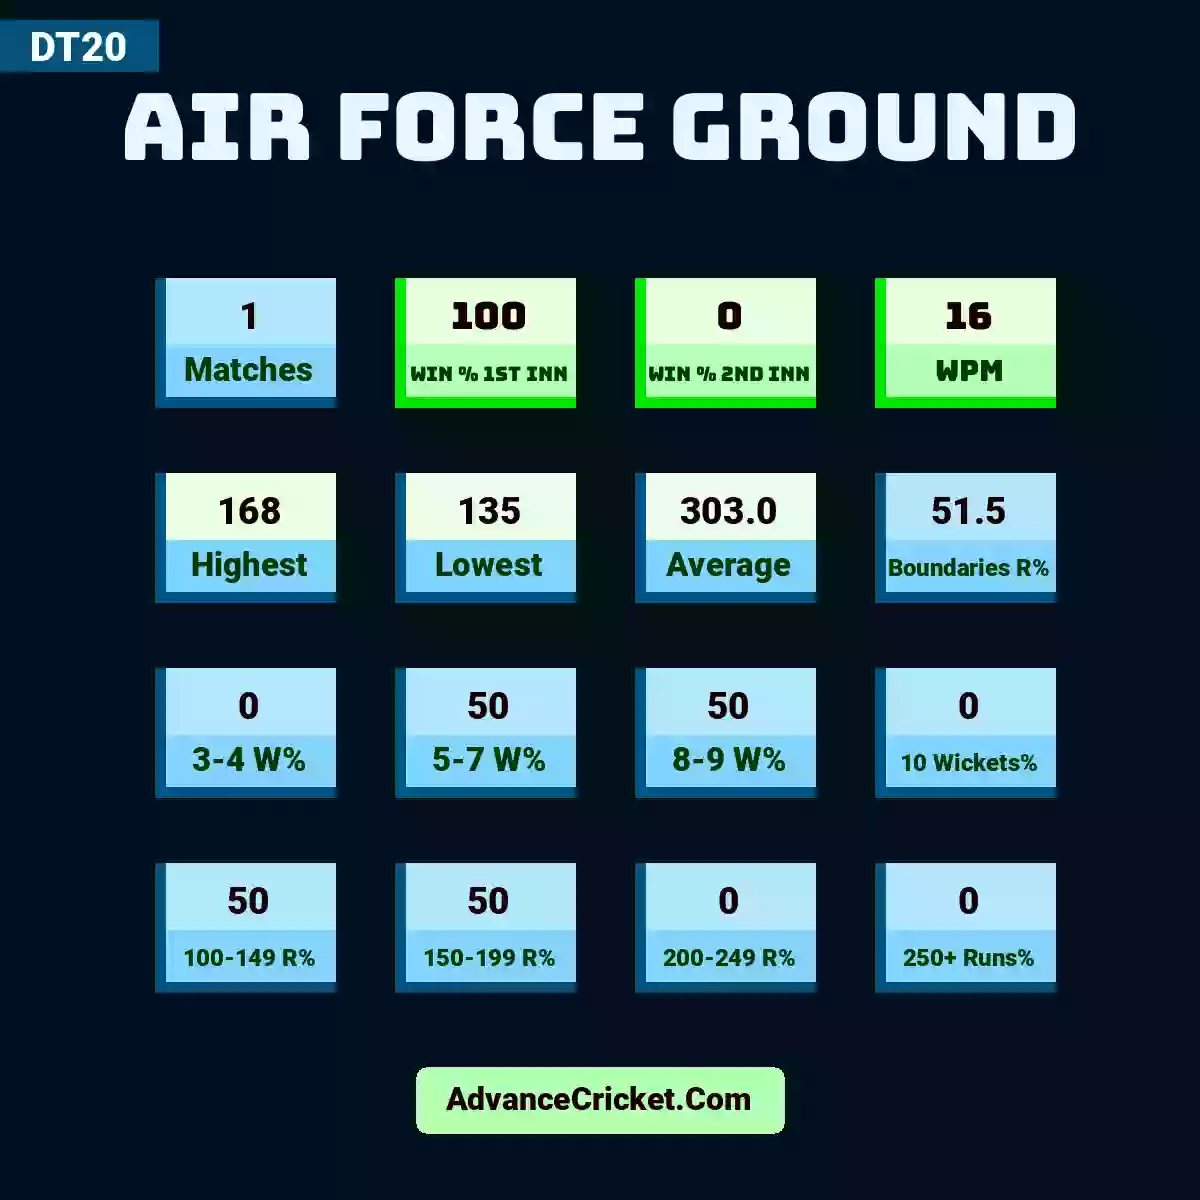 Image showing Air Force Ground with Matches: 1, Win % 1st Inn: 100, Win % 2nd Inn: 0, WPM: 16, Highest: 168, Lowest: 135, Average: 303.0, Boundaries R%: 51.5, 3-4 W%: 0, 5-7 W%: 50, 8-9 W%: 50, 10 Wickets%: 0, 100-149 R%: 50, 150-199 R%: 50, 200-249 R%: 0, 250+ Runs%: 0.